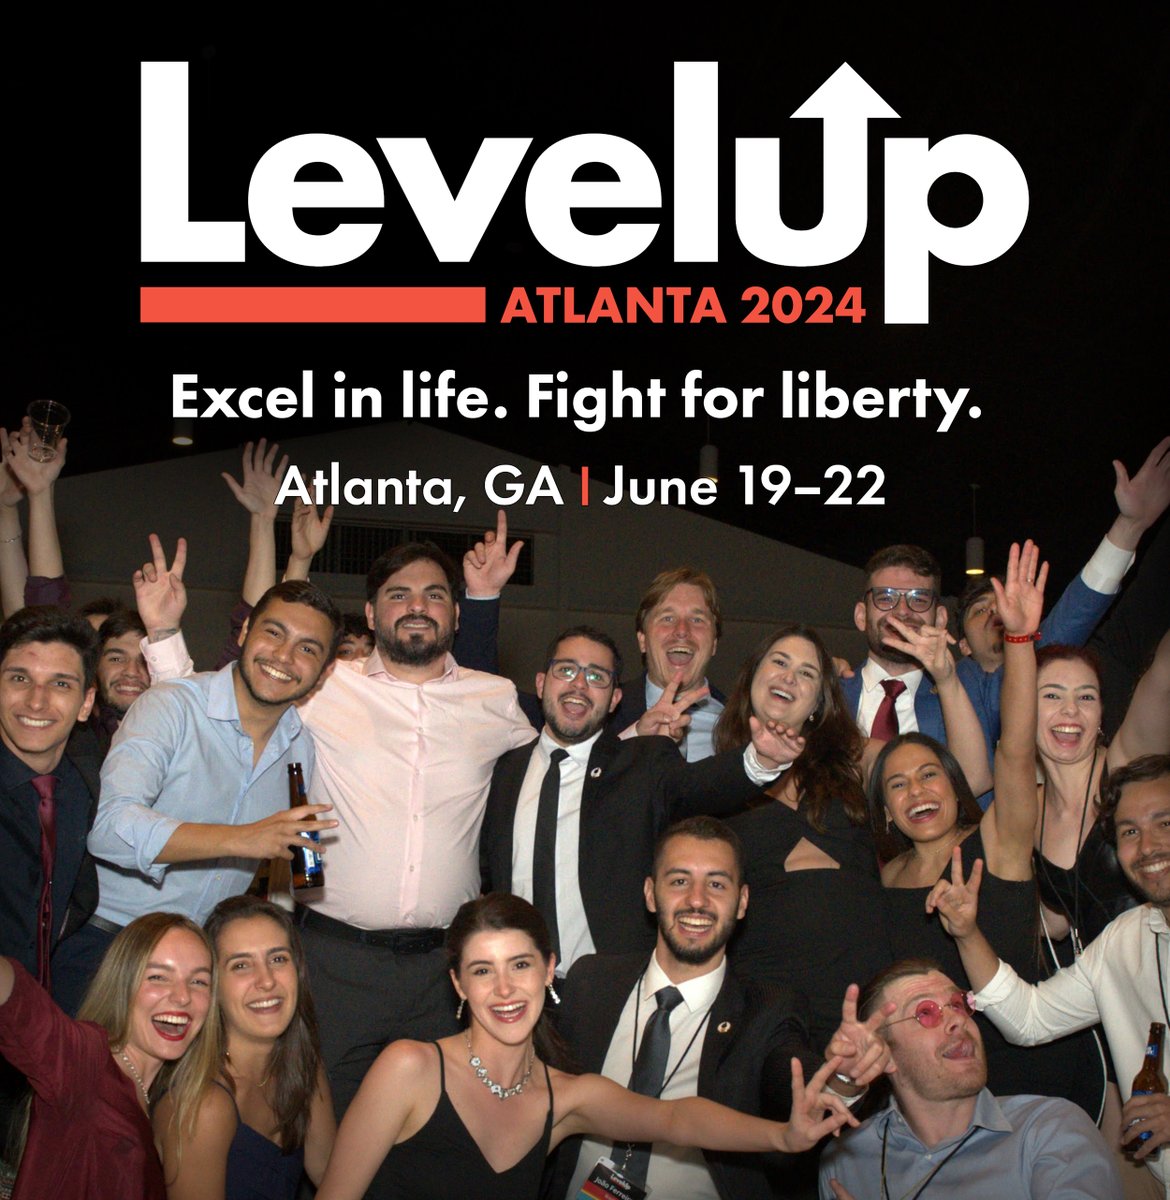 Excel in life. Fight for liberty. If these are your goals, consider joining our friends at @ObjStdInstitute for LevelUp 2024, with speakers including Ayaan Hirsi Ali, Chris Rufo, and many of FEE's alumni. Use promo code FEE-LU24 at ObjectiveStandard.org/Conferences for a 40% discount.